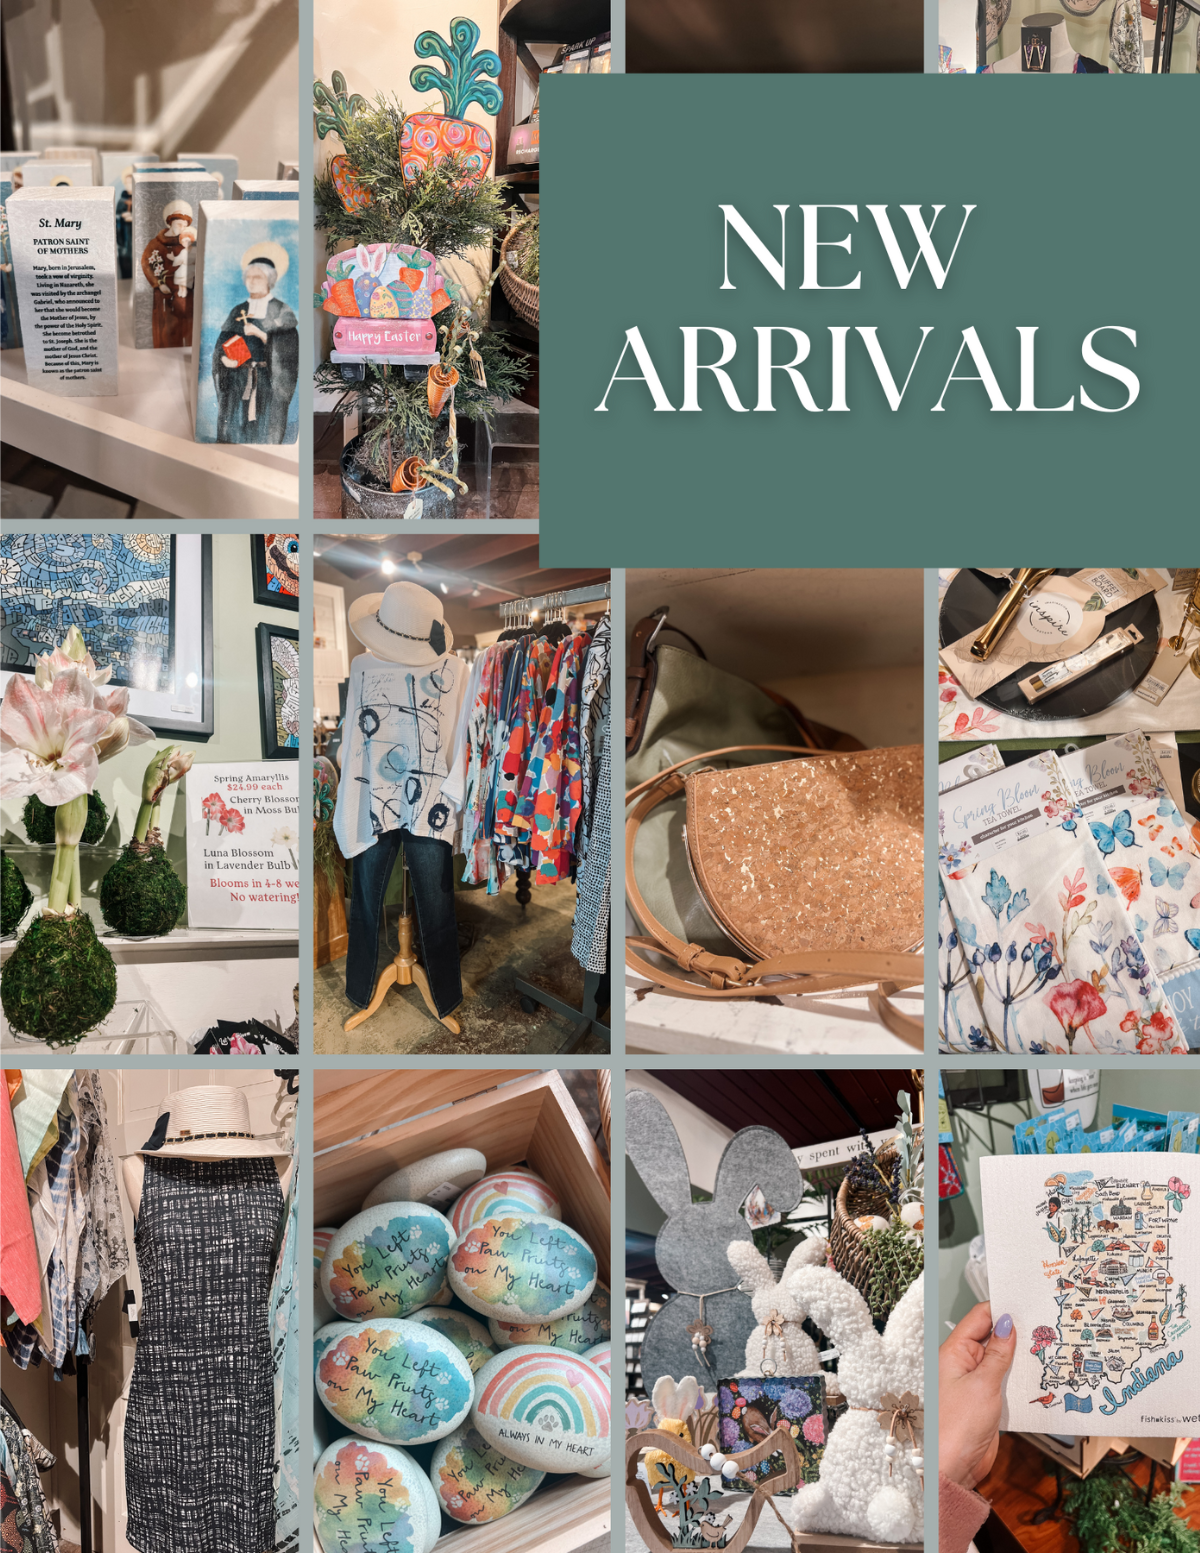 New Arrivals at Willow